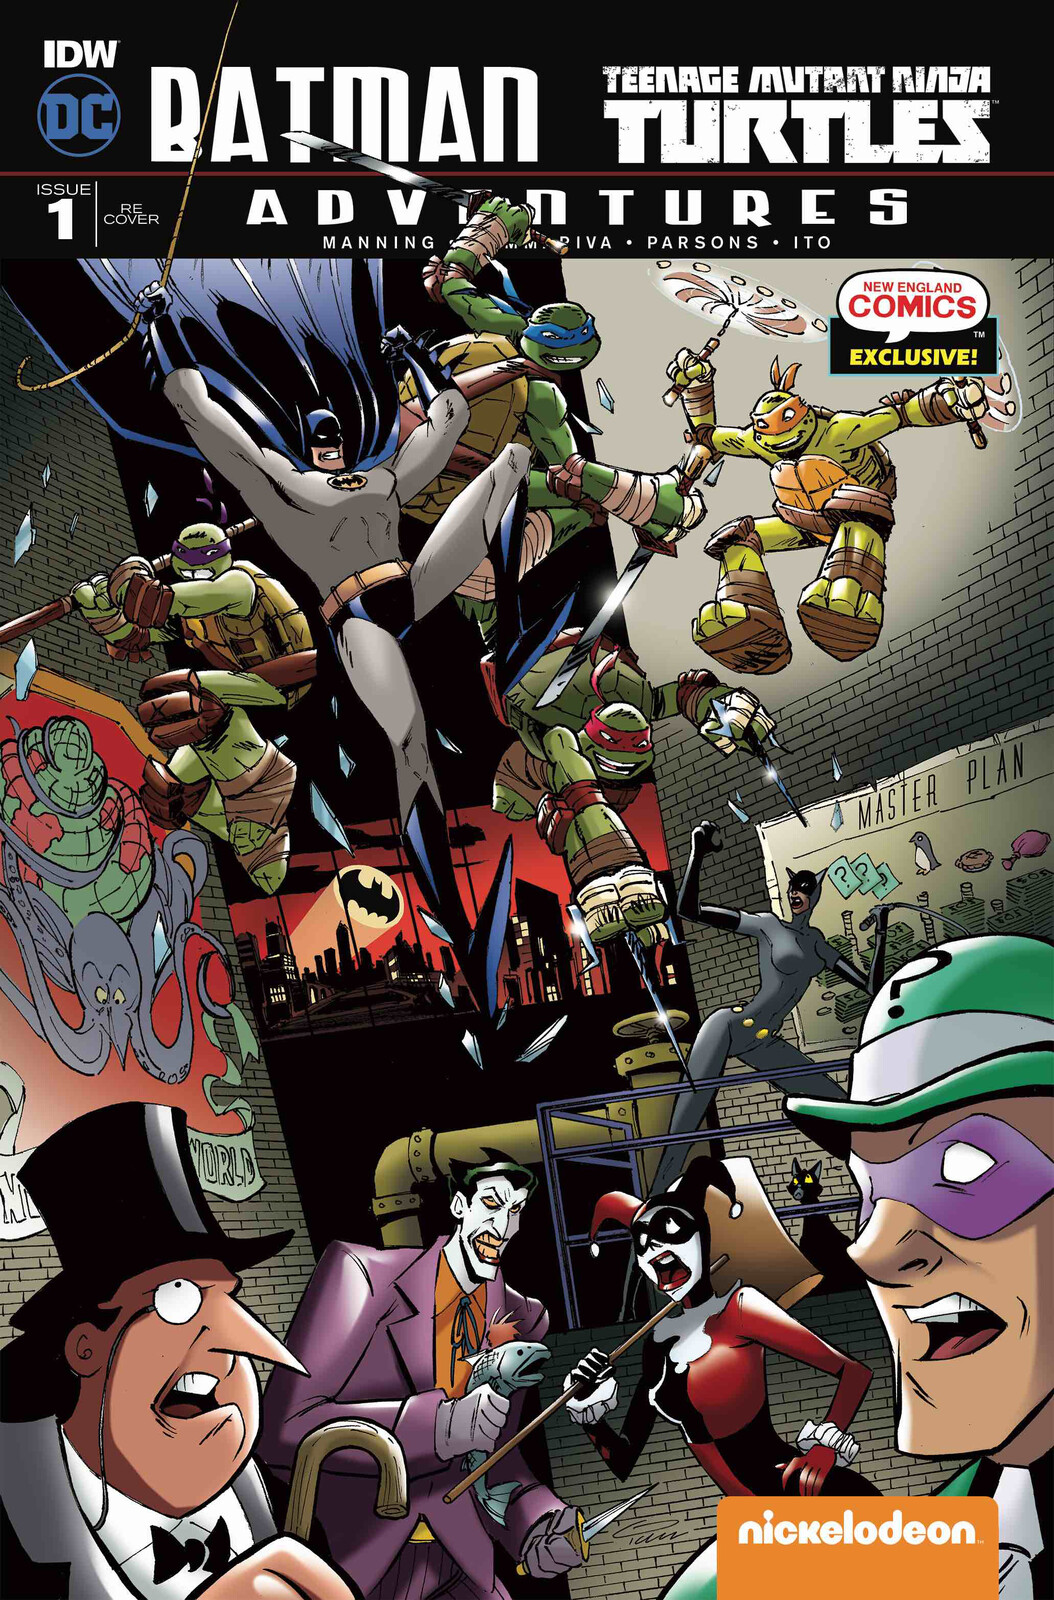 DC Comics and IDW published cover for Batman and Teenage Mutant Ninja Turtles #1 by Ian Chase Nichols